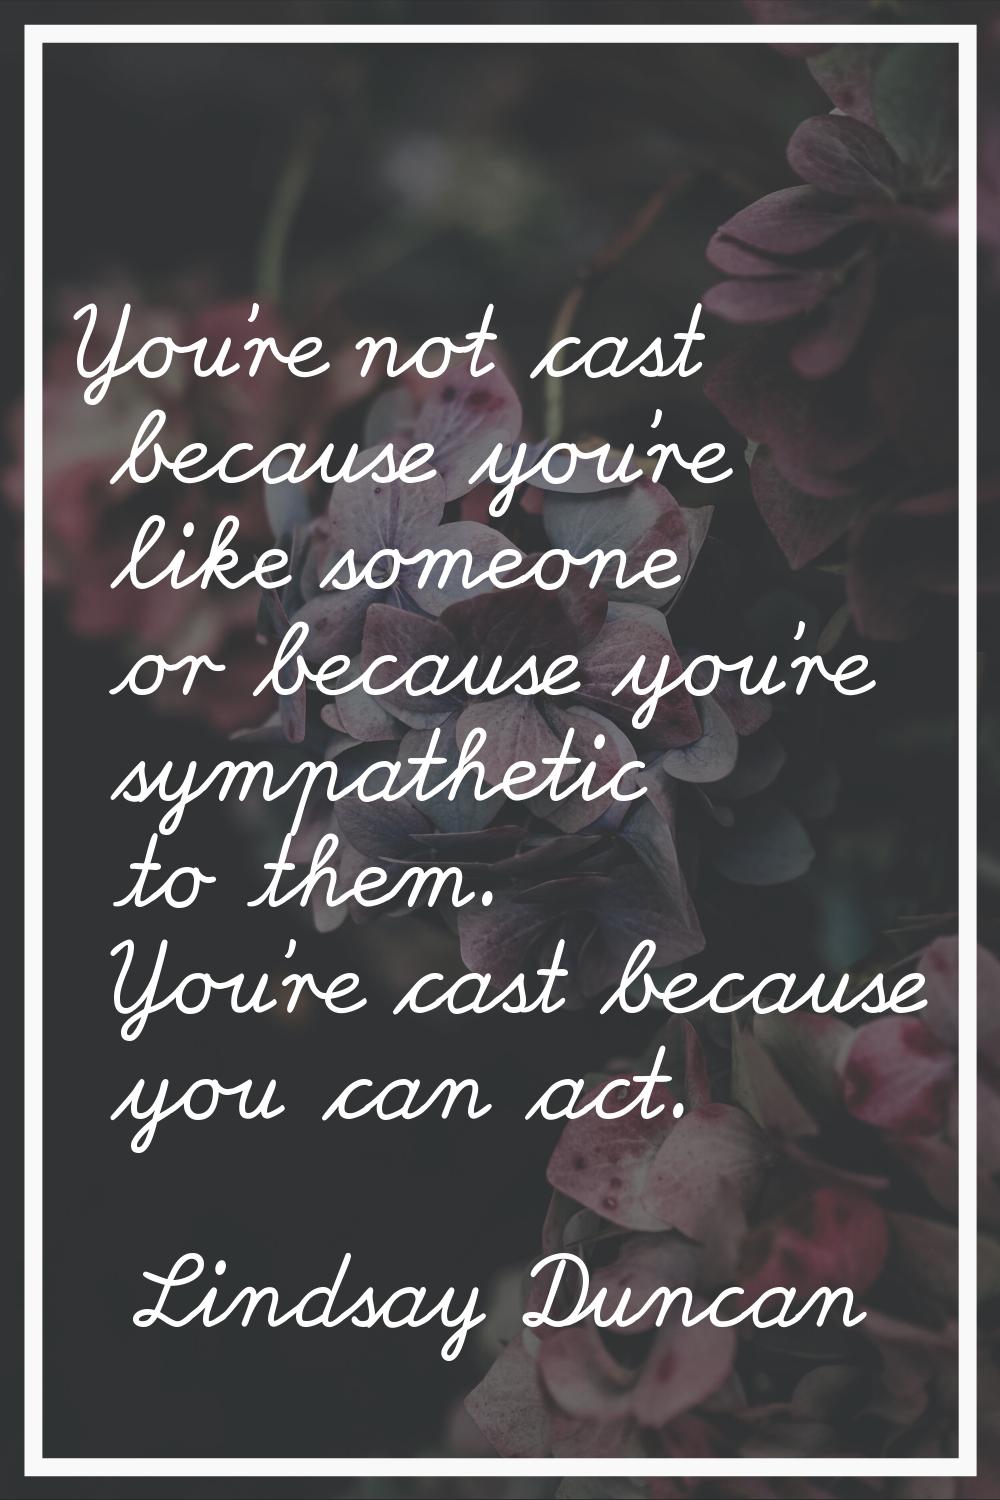 You're not cast because you're like someone or because you're sympathetic to them. You're cast beca